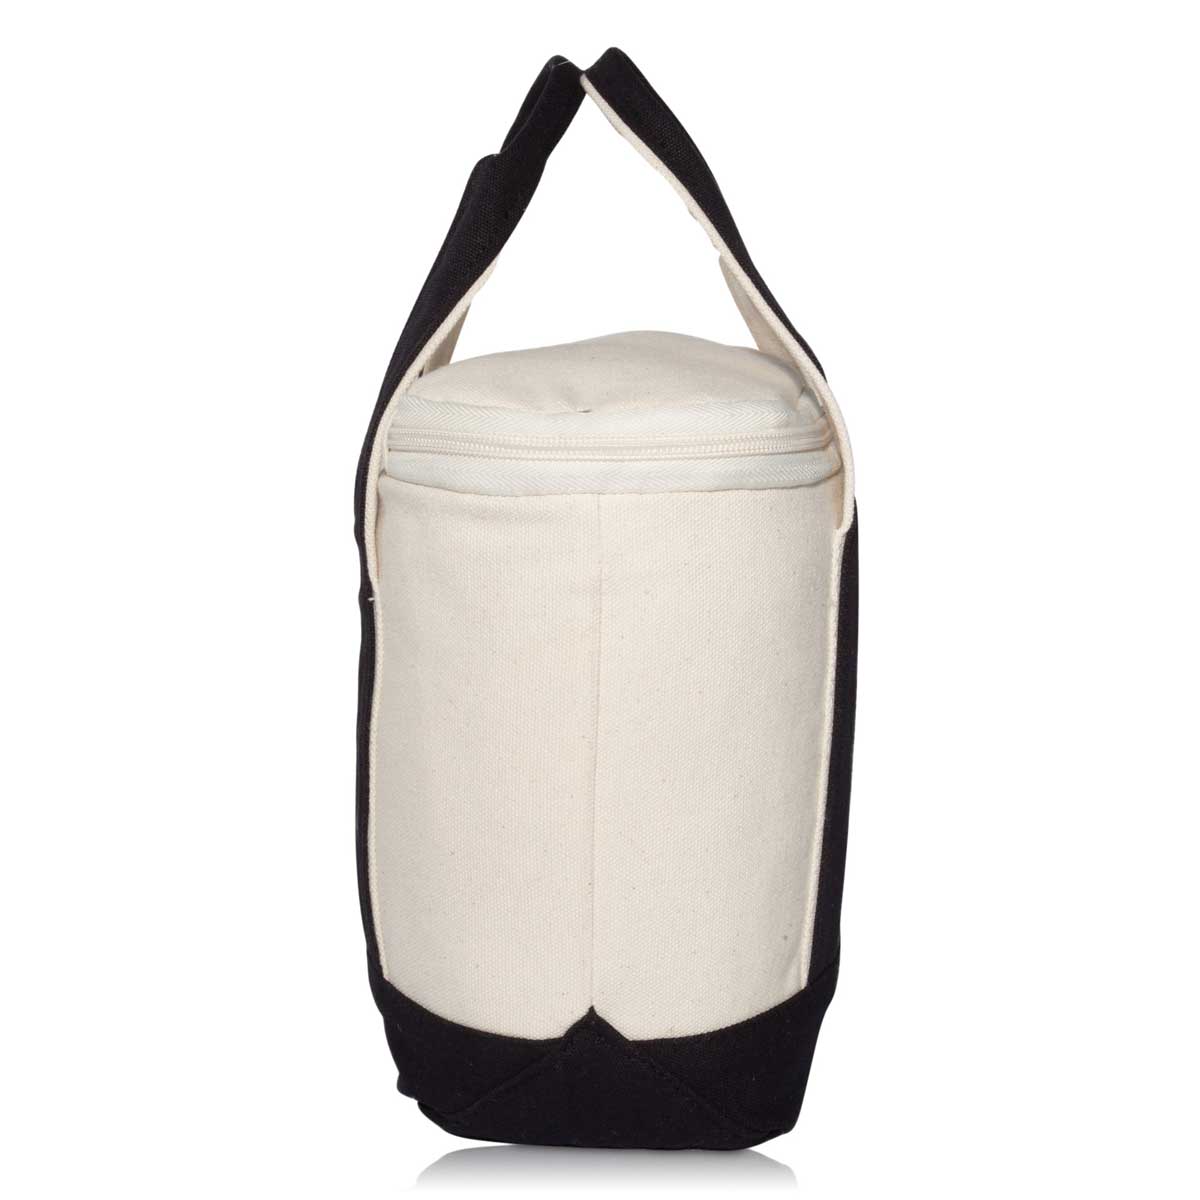 DALIX Small Lunch Bag